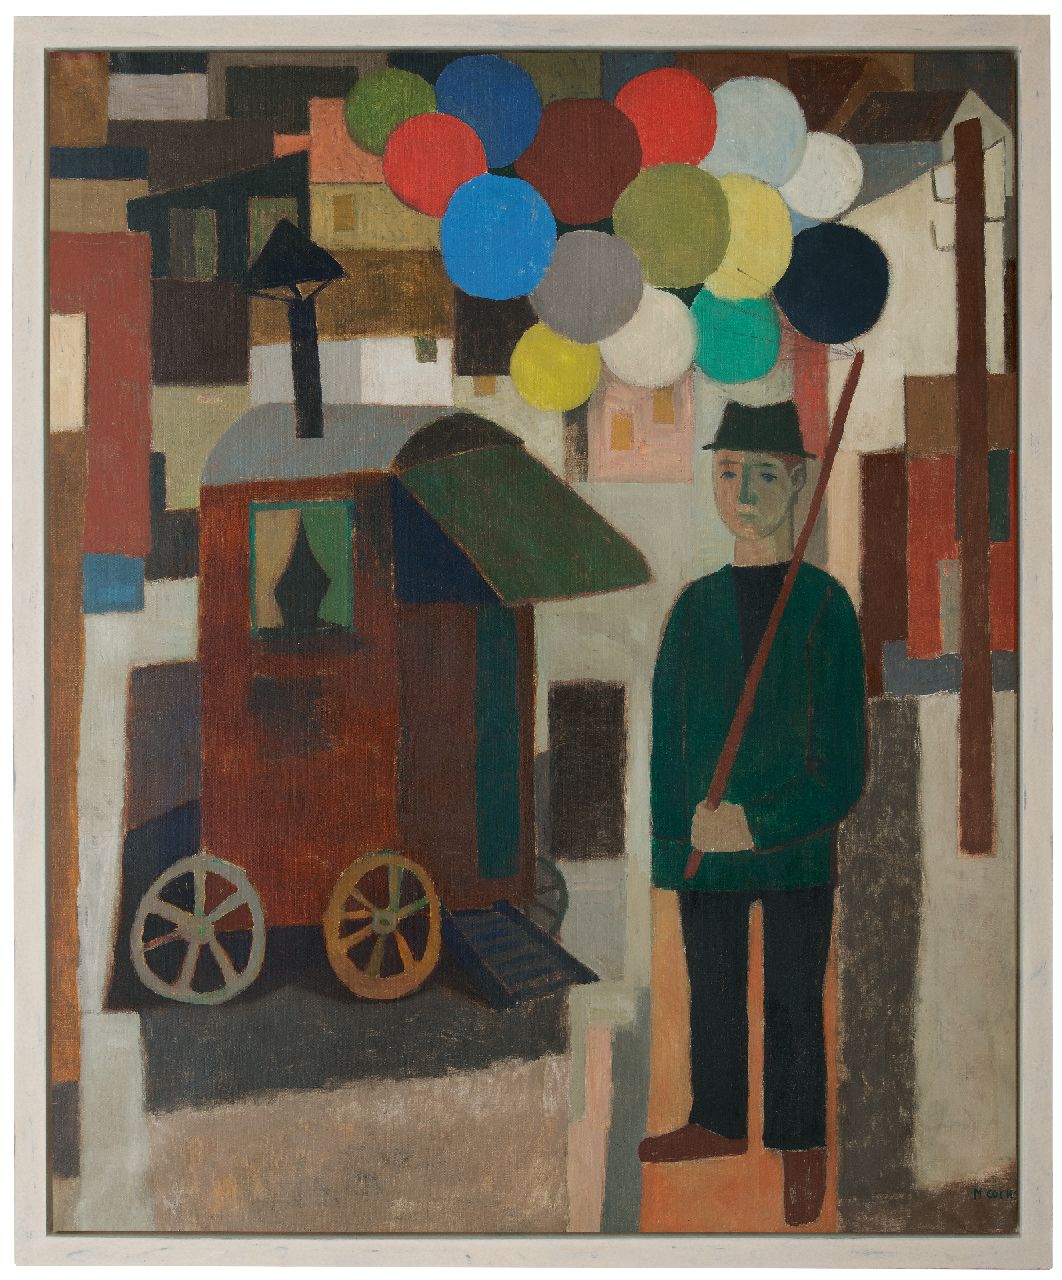 Cockx M.  | Marcel Cockx | Paintings offered for sale | Balloon seller, oil on canvas 178.9 x 150.3 cm, signed l.r.